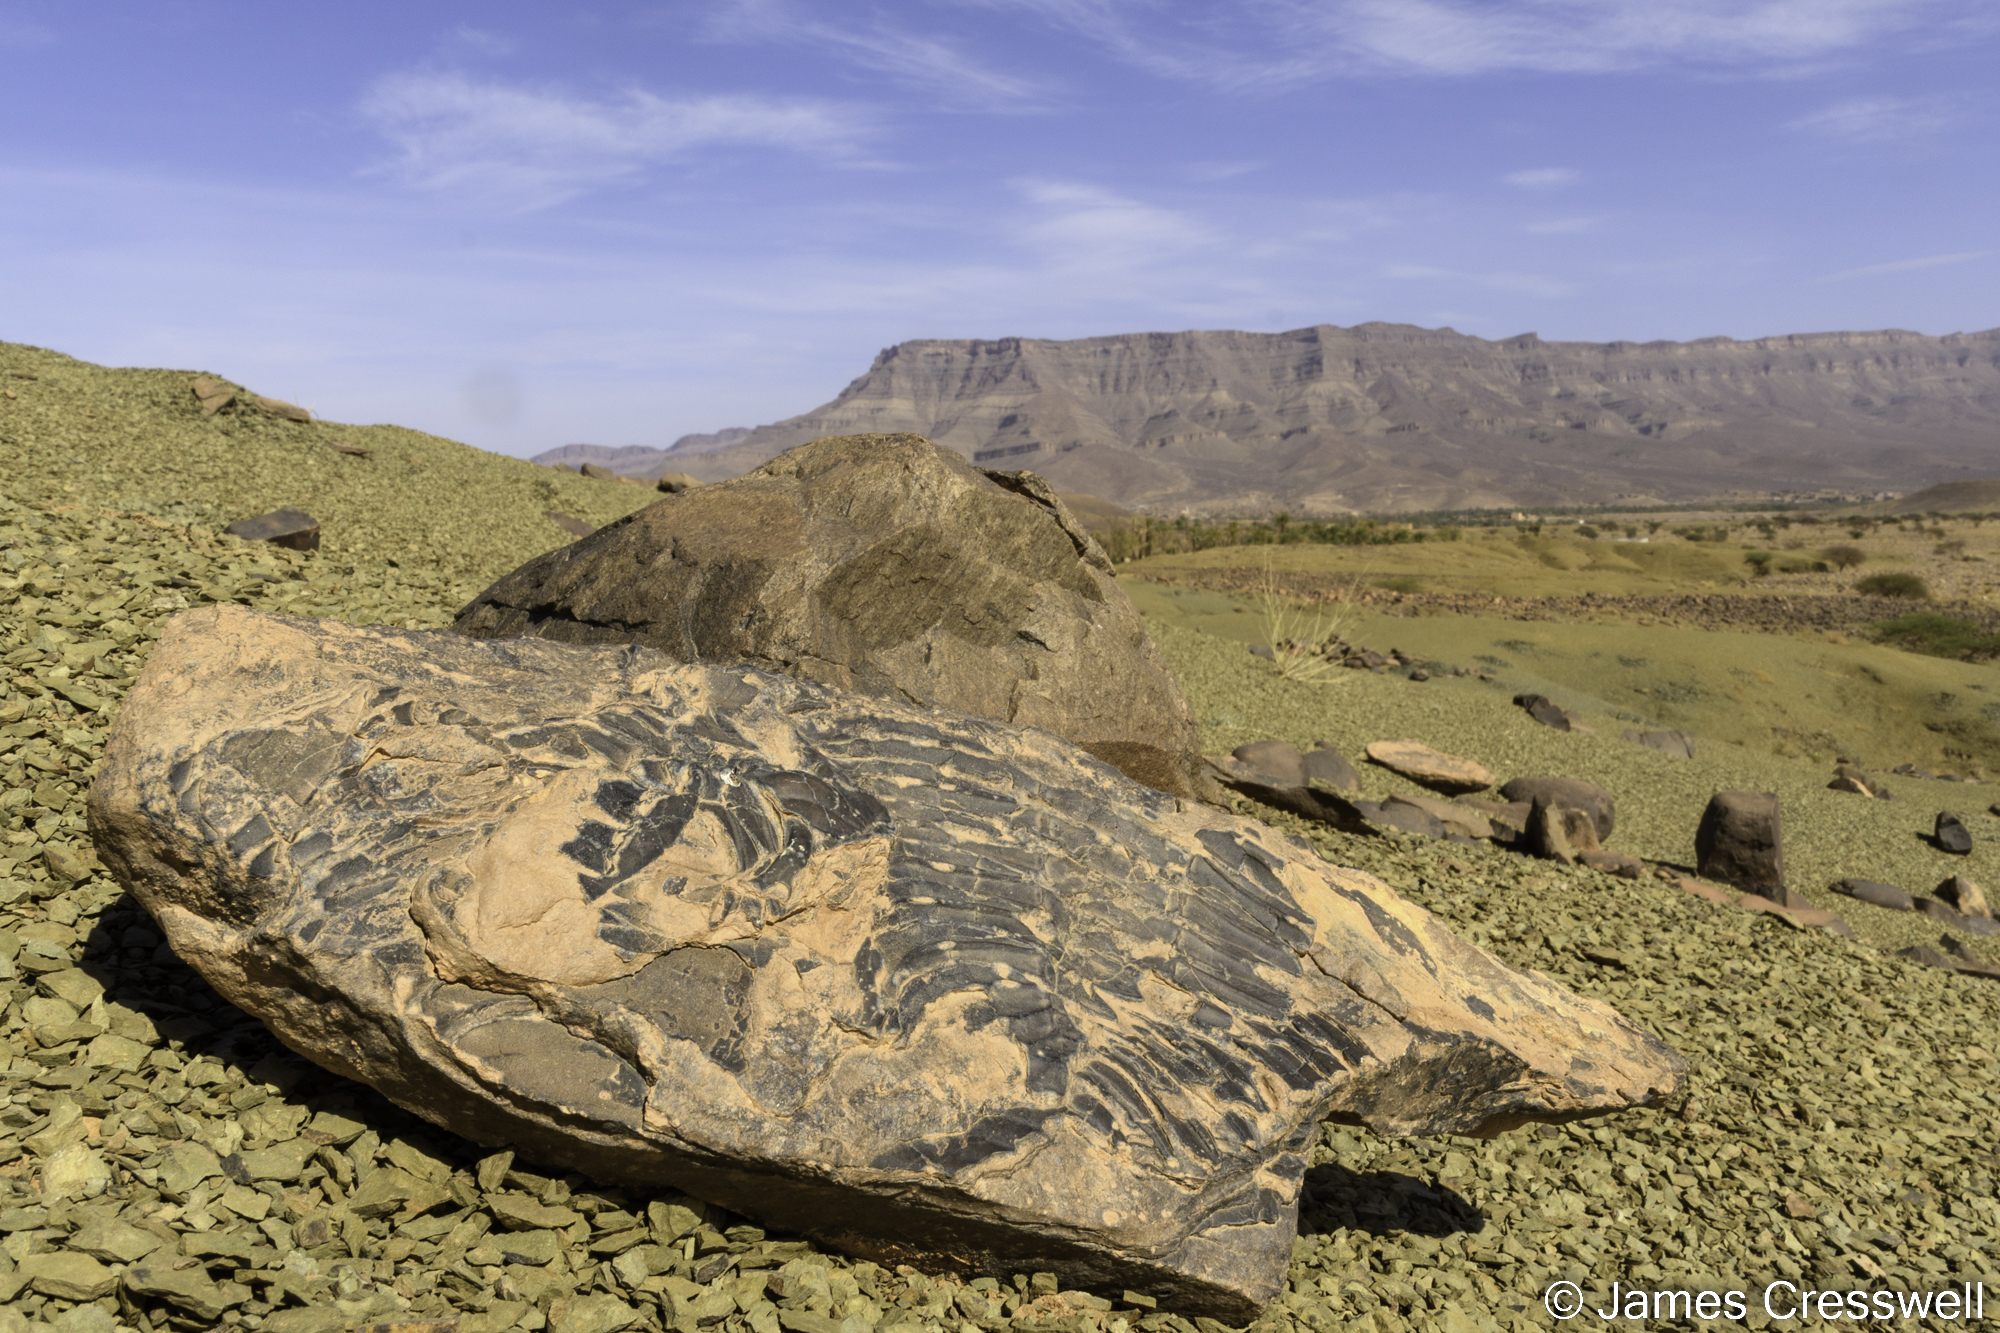 A photograph with a trilobite fossil in the foreground and a mountain in the background